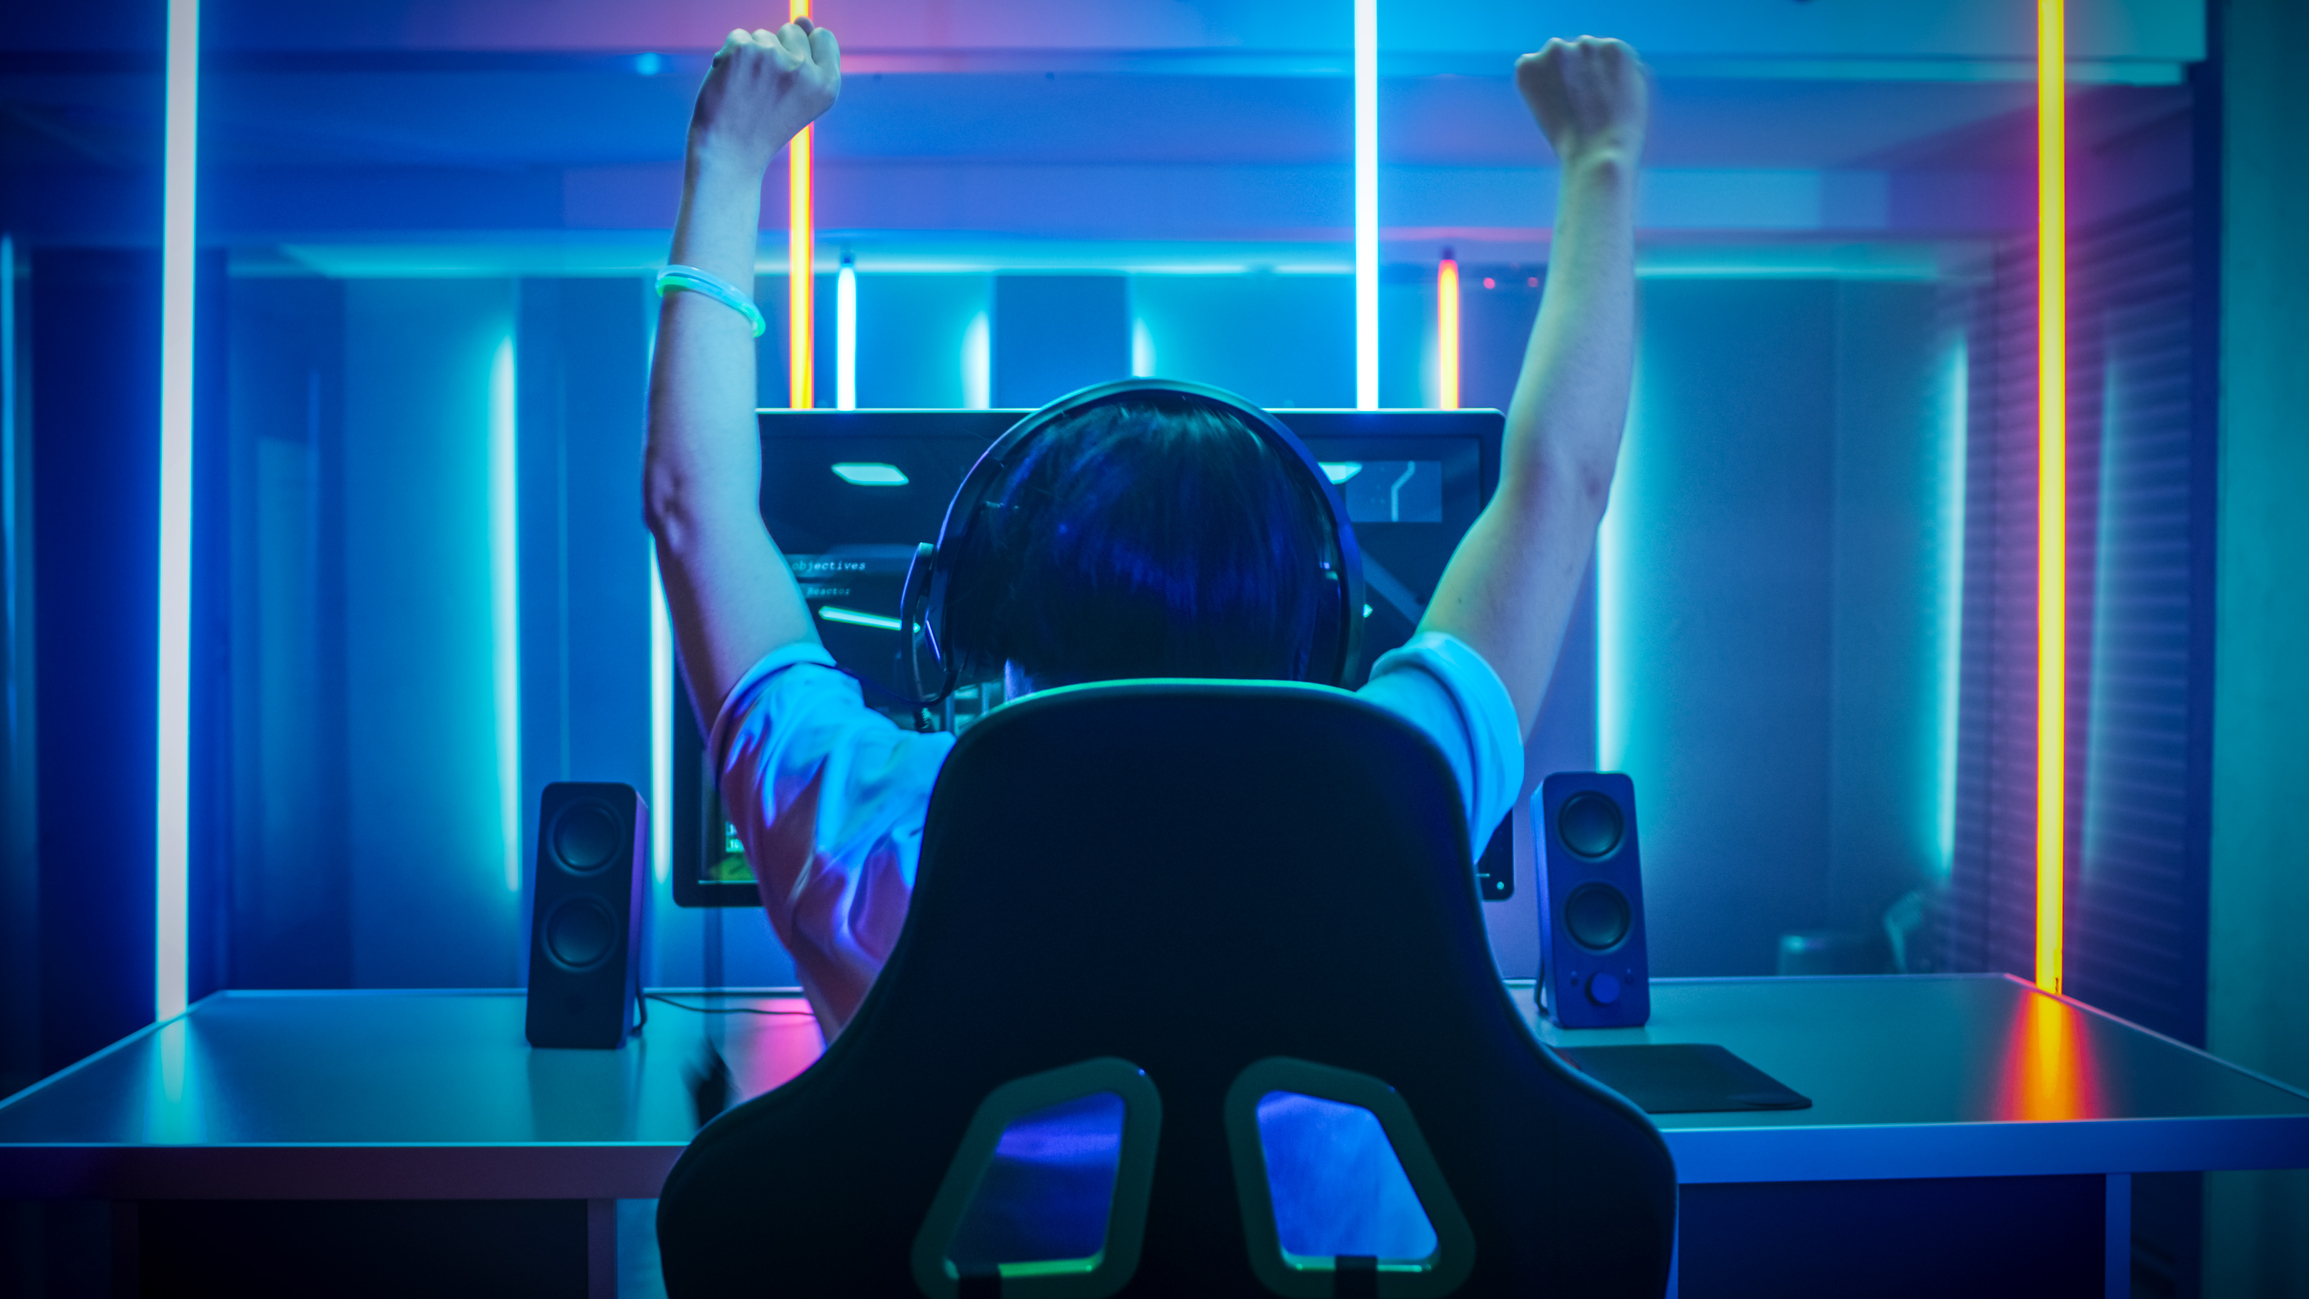 Gamer sitting in chair with hands raised in victory